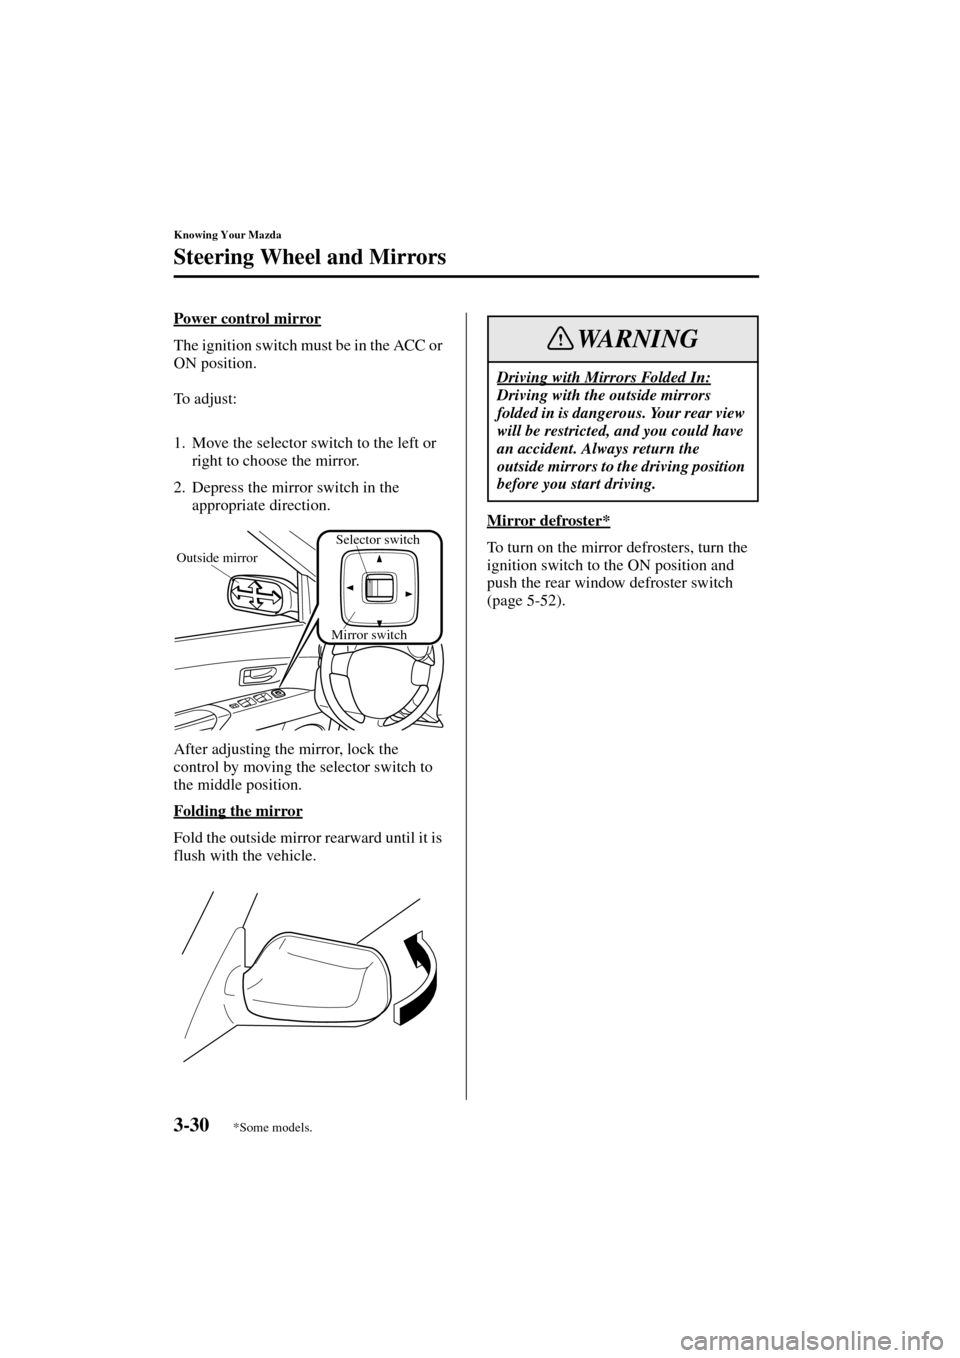 MAZDA MODEL 3 HATCHBACK 2004  Owners Manual (in English) 3-30
Knowing Your Mazda
Steering Wheel and Mirrors
Form No. 8S18-EA-03I
Power control mirror
The ignition switch must be in the ACC or 
ON position.
To  a d j u s t :
1. Move the selector switch to th